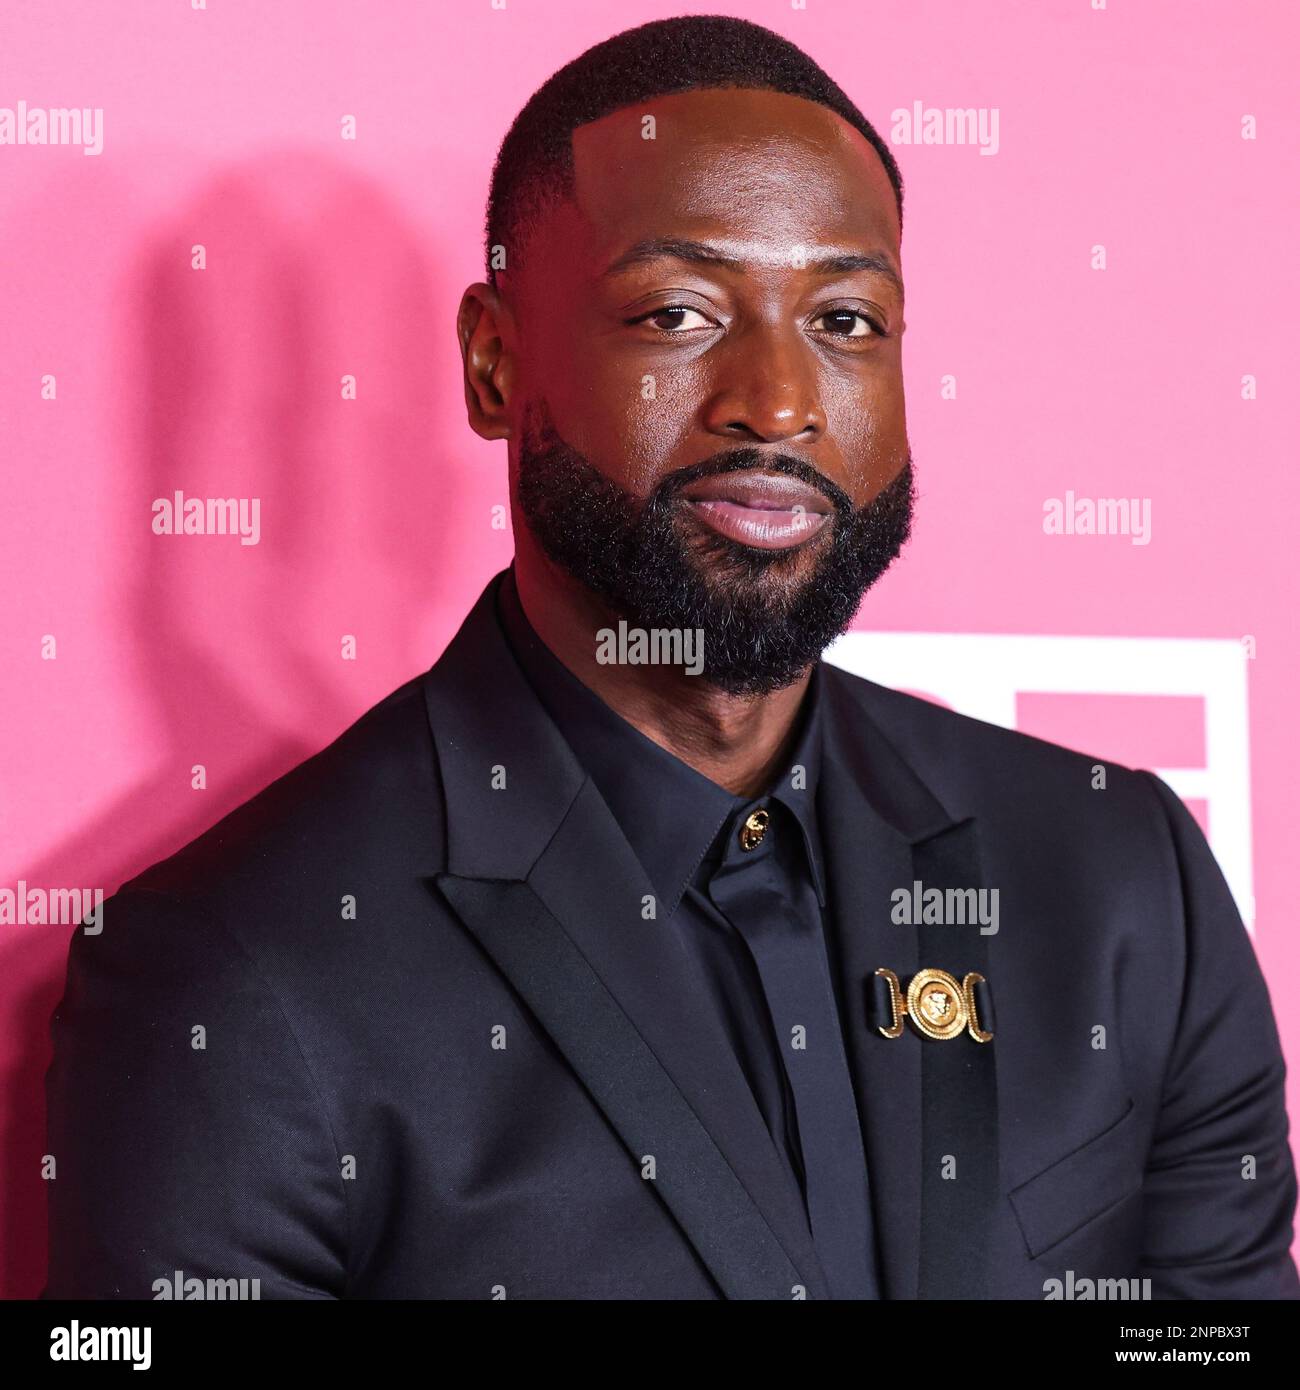 Pasadena, United States. 25th Feb, 2023. PASADENA, LOS ANGELES, CALIFORNIA, USA - FEBRUARY 25: American former professional basketball player Dwyane Wade, recipient of the President's Award wearing Versace poses in the press room at the 54th Annual NAACP Image Awards held at the Pasadena Civic Auditorium on February 25, 2023 in Pasadena, Los Angeles, California, United States. (Photo by Xavier Collin/Image Press Agency) Credit: Image Press Agency/Alamy Live News Stock Photo